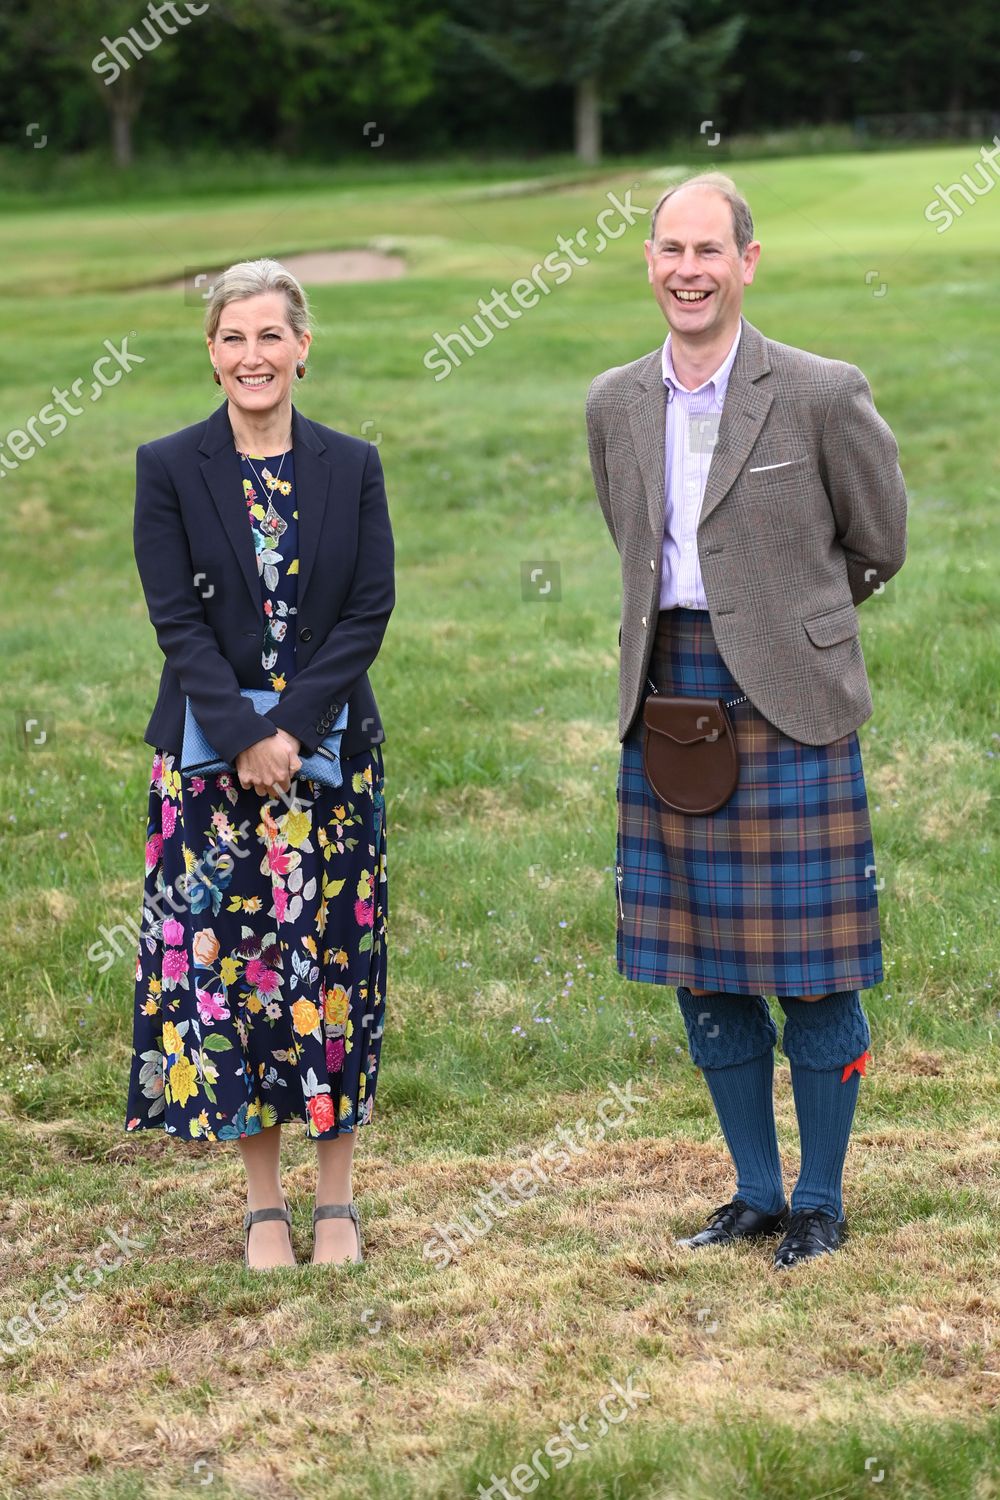 prince-edward-and-sophie-countess-of-wessex-visit-to-forfar-golf-club-scotland-uk-shutterstock-editorial-12172307k.jpg